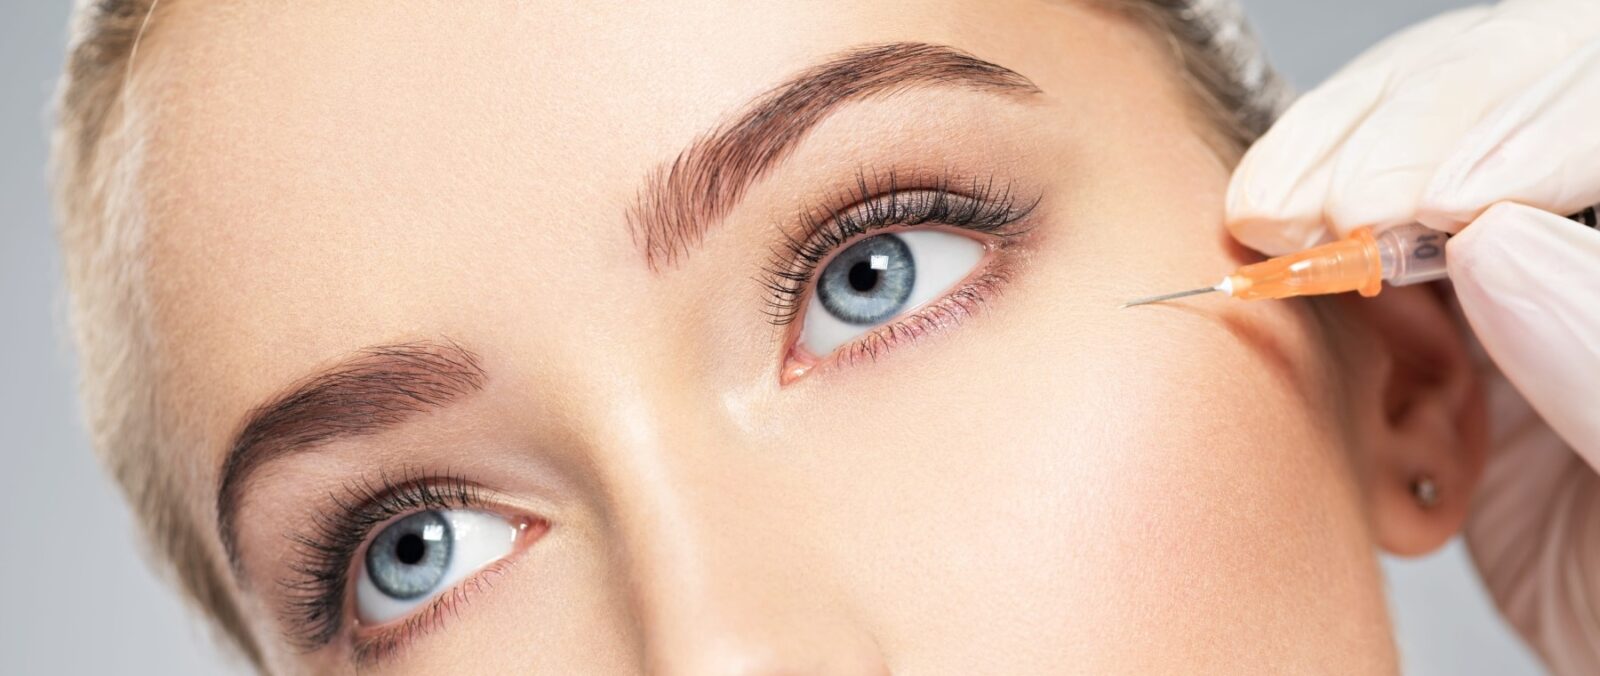 Botox vs Fillers: Which One Is Best at Treating Wrinkles?